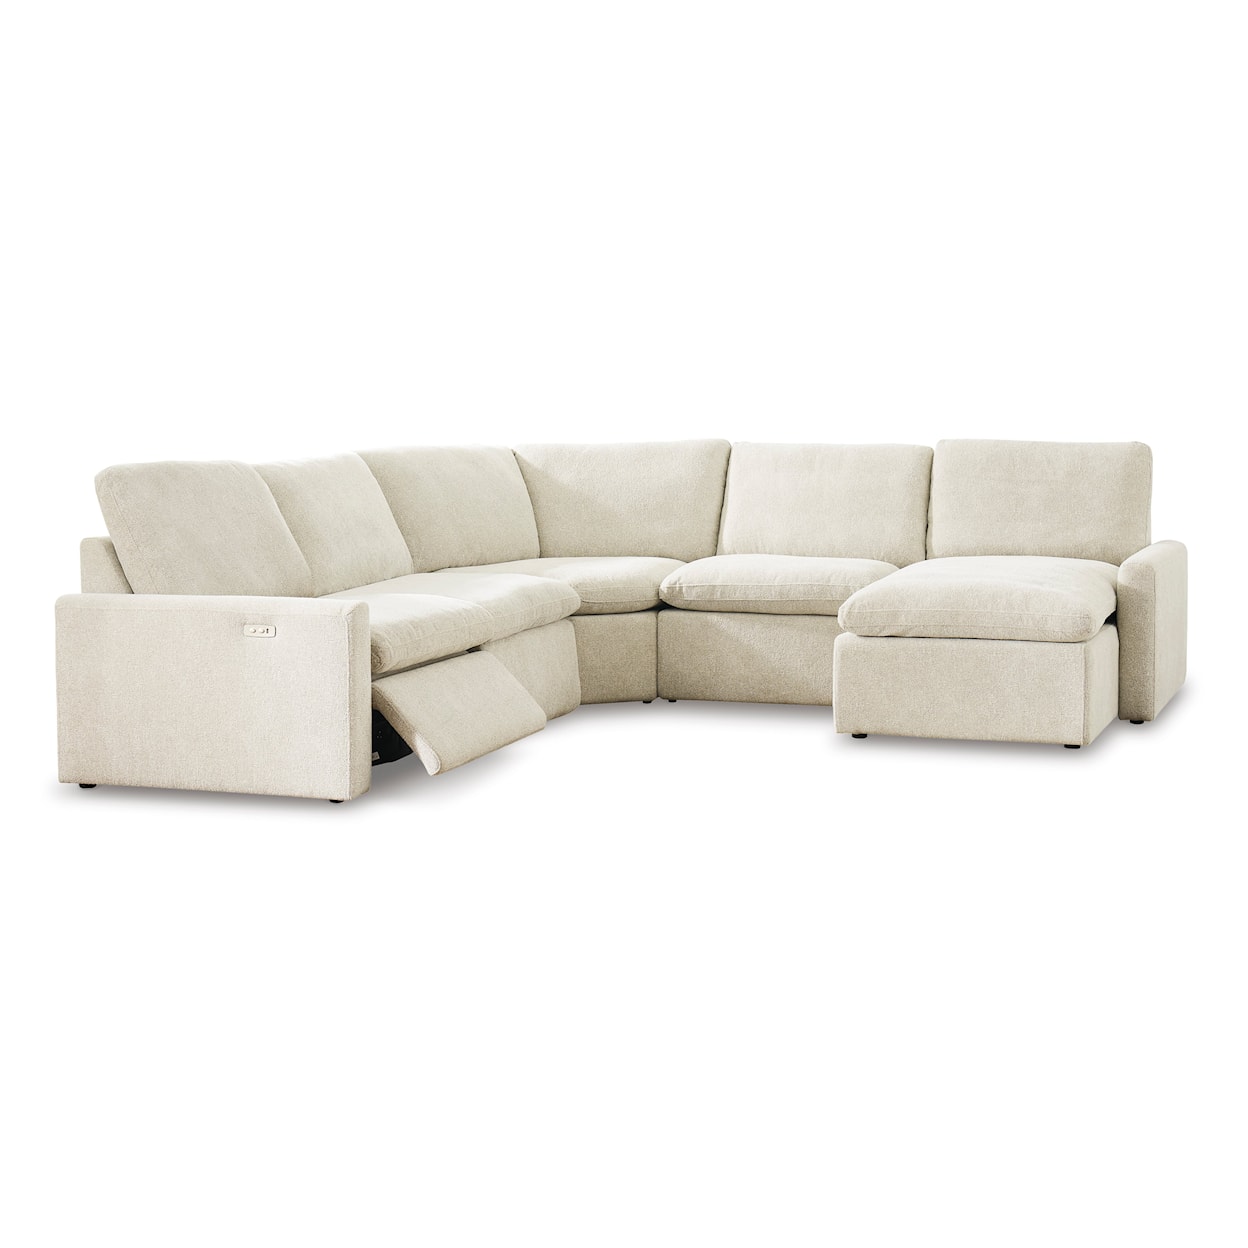 Ashley Signature Design Hartsdale 5-Piece Power Reclining Sectional